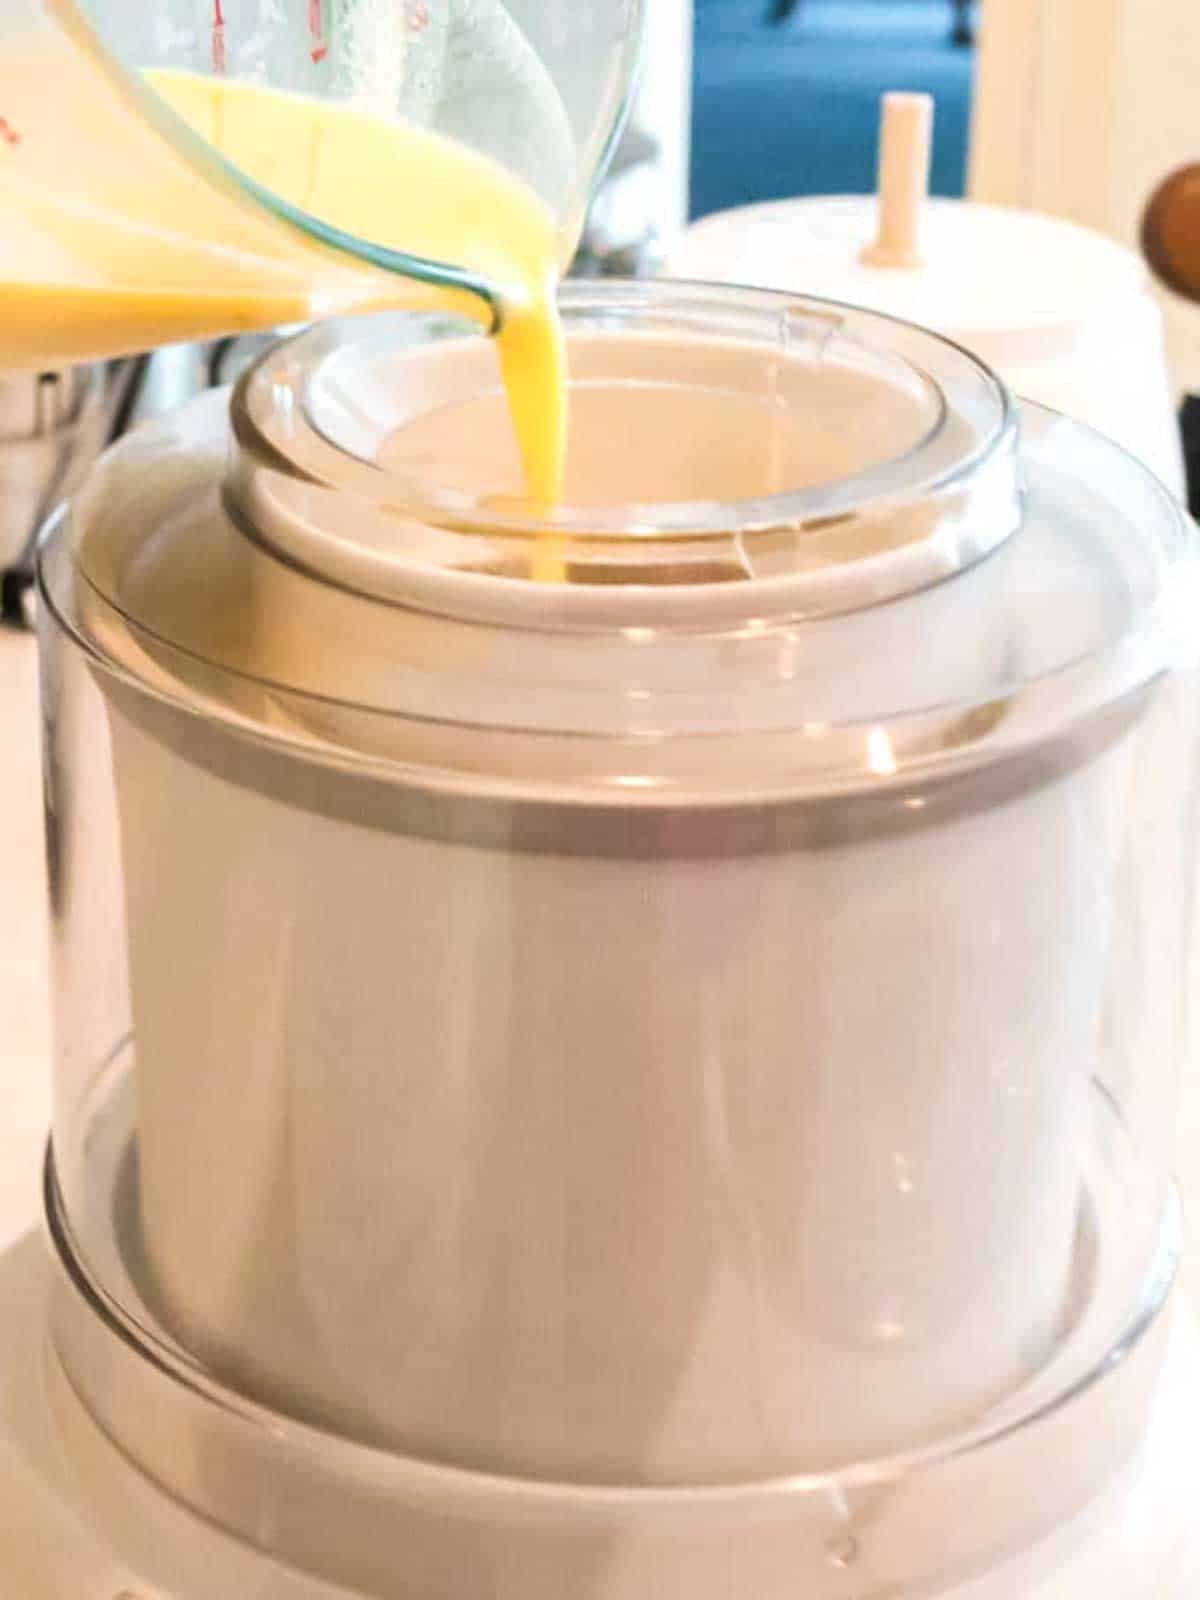 Pouring sherbet mixture into ice cream maker.